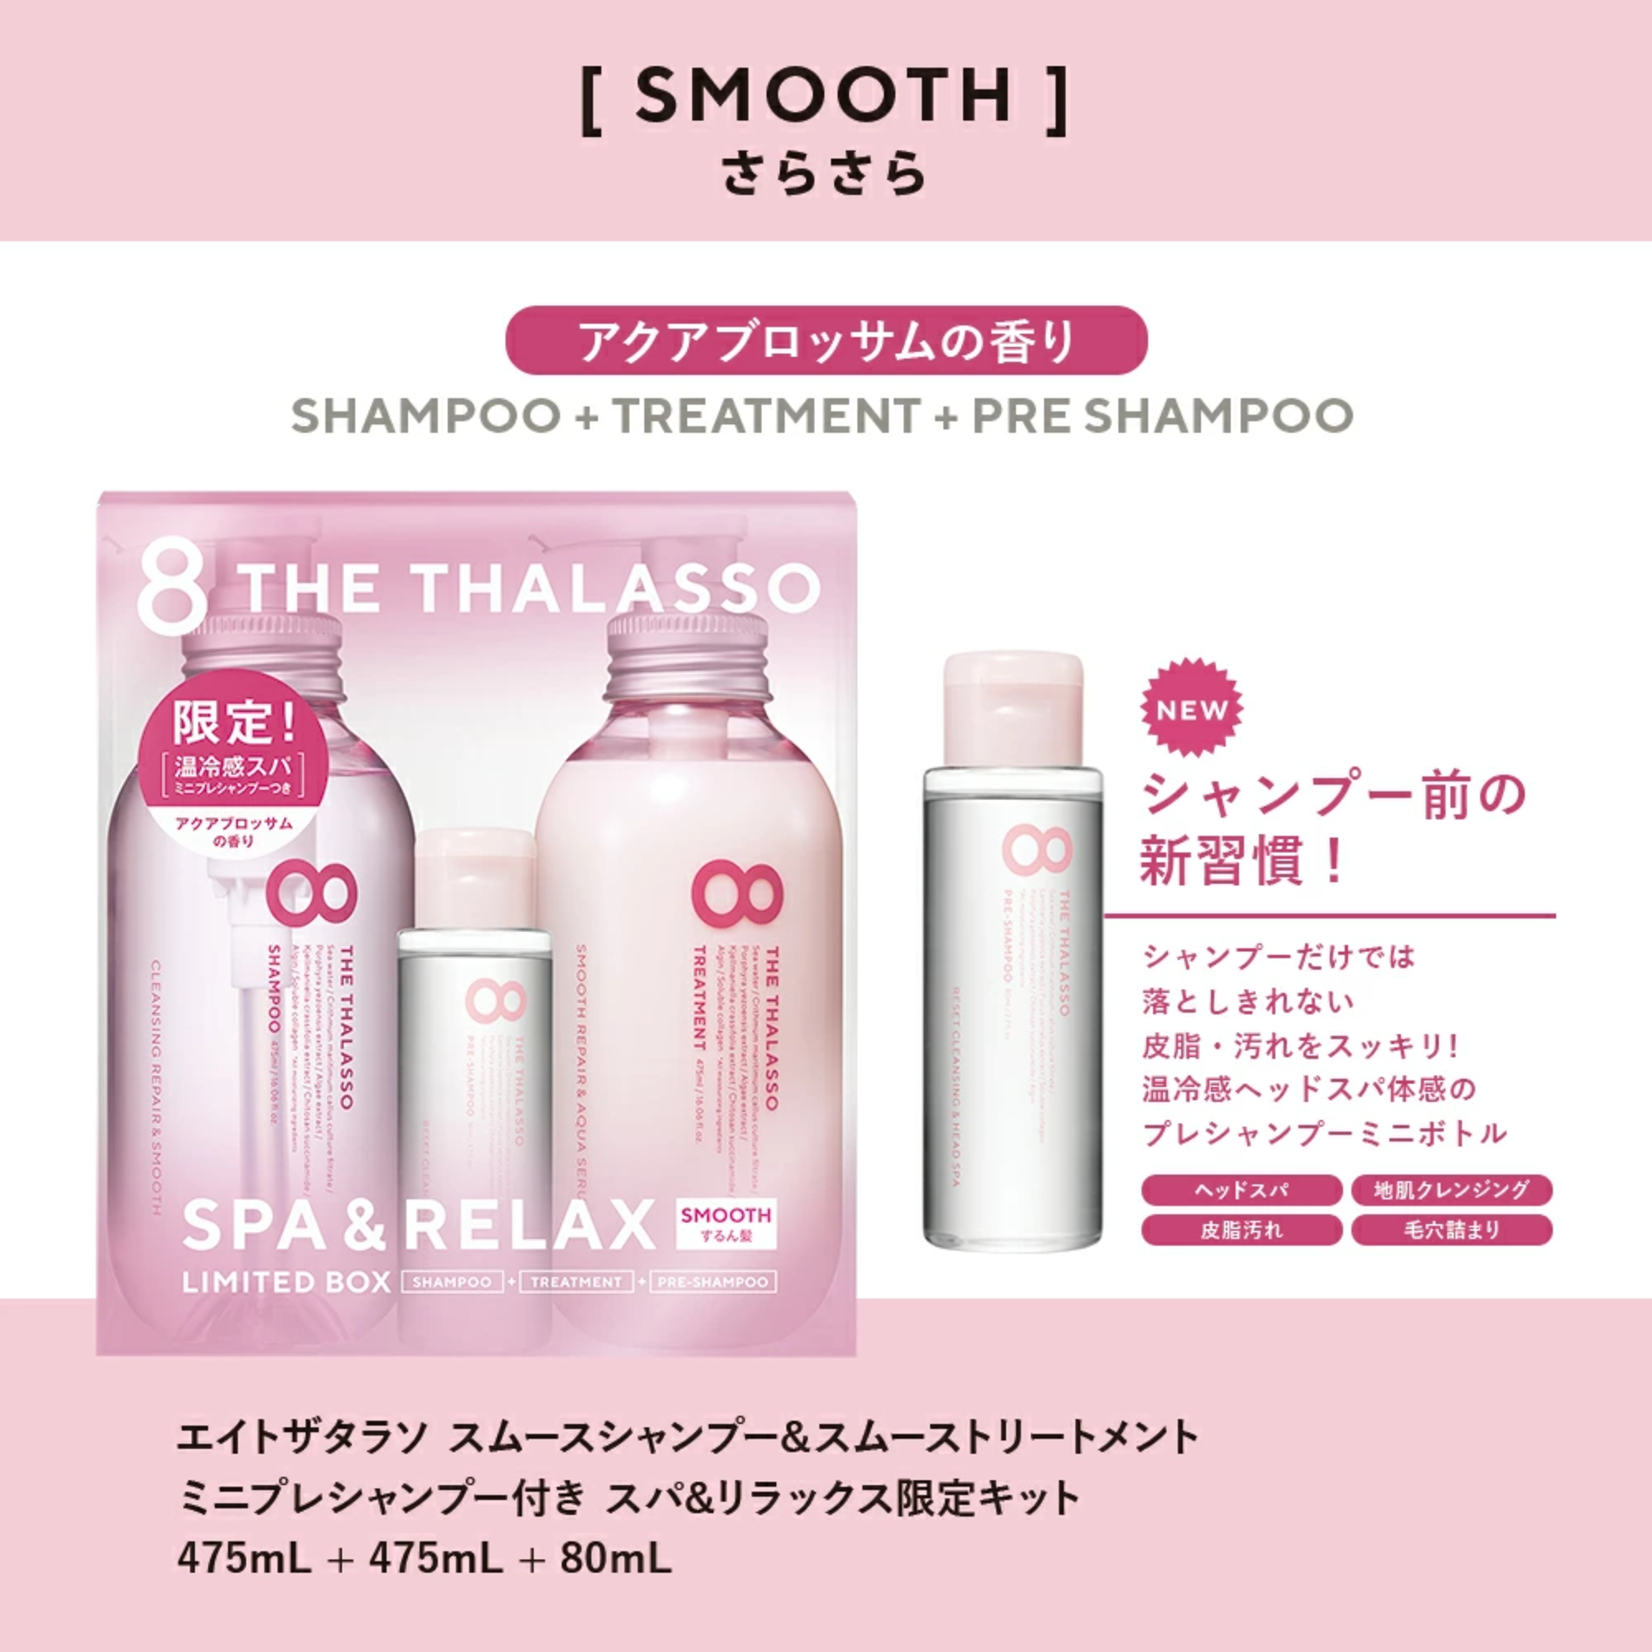 8 The Thalasso Eight the Thalasso Pink Spa &Relax Limited Kit -Smooth (Aqua Blossom)